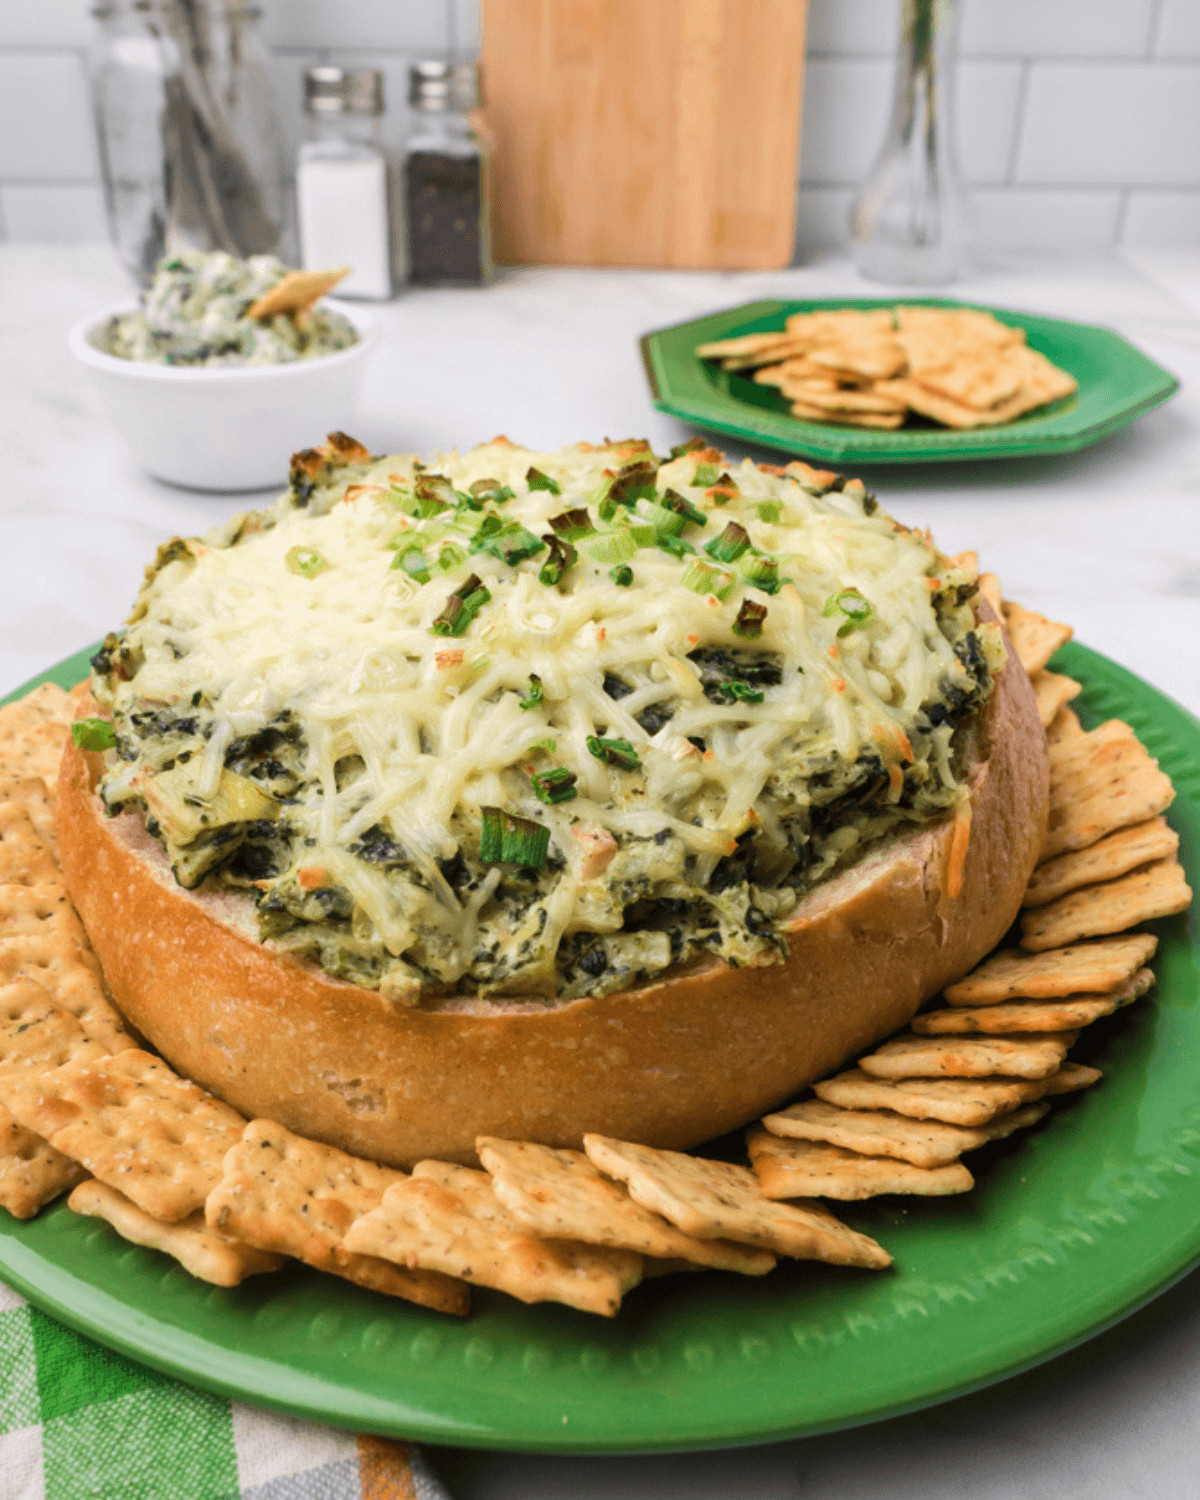 A green spinach cheesecake on a plate with crackers, perfect for those craving a flavorful Spinach and Artichoke Dip without Mayo.